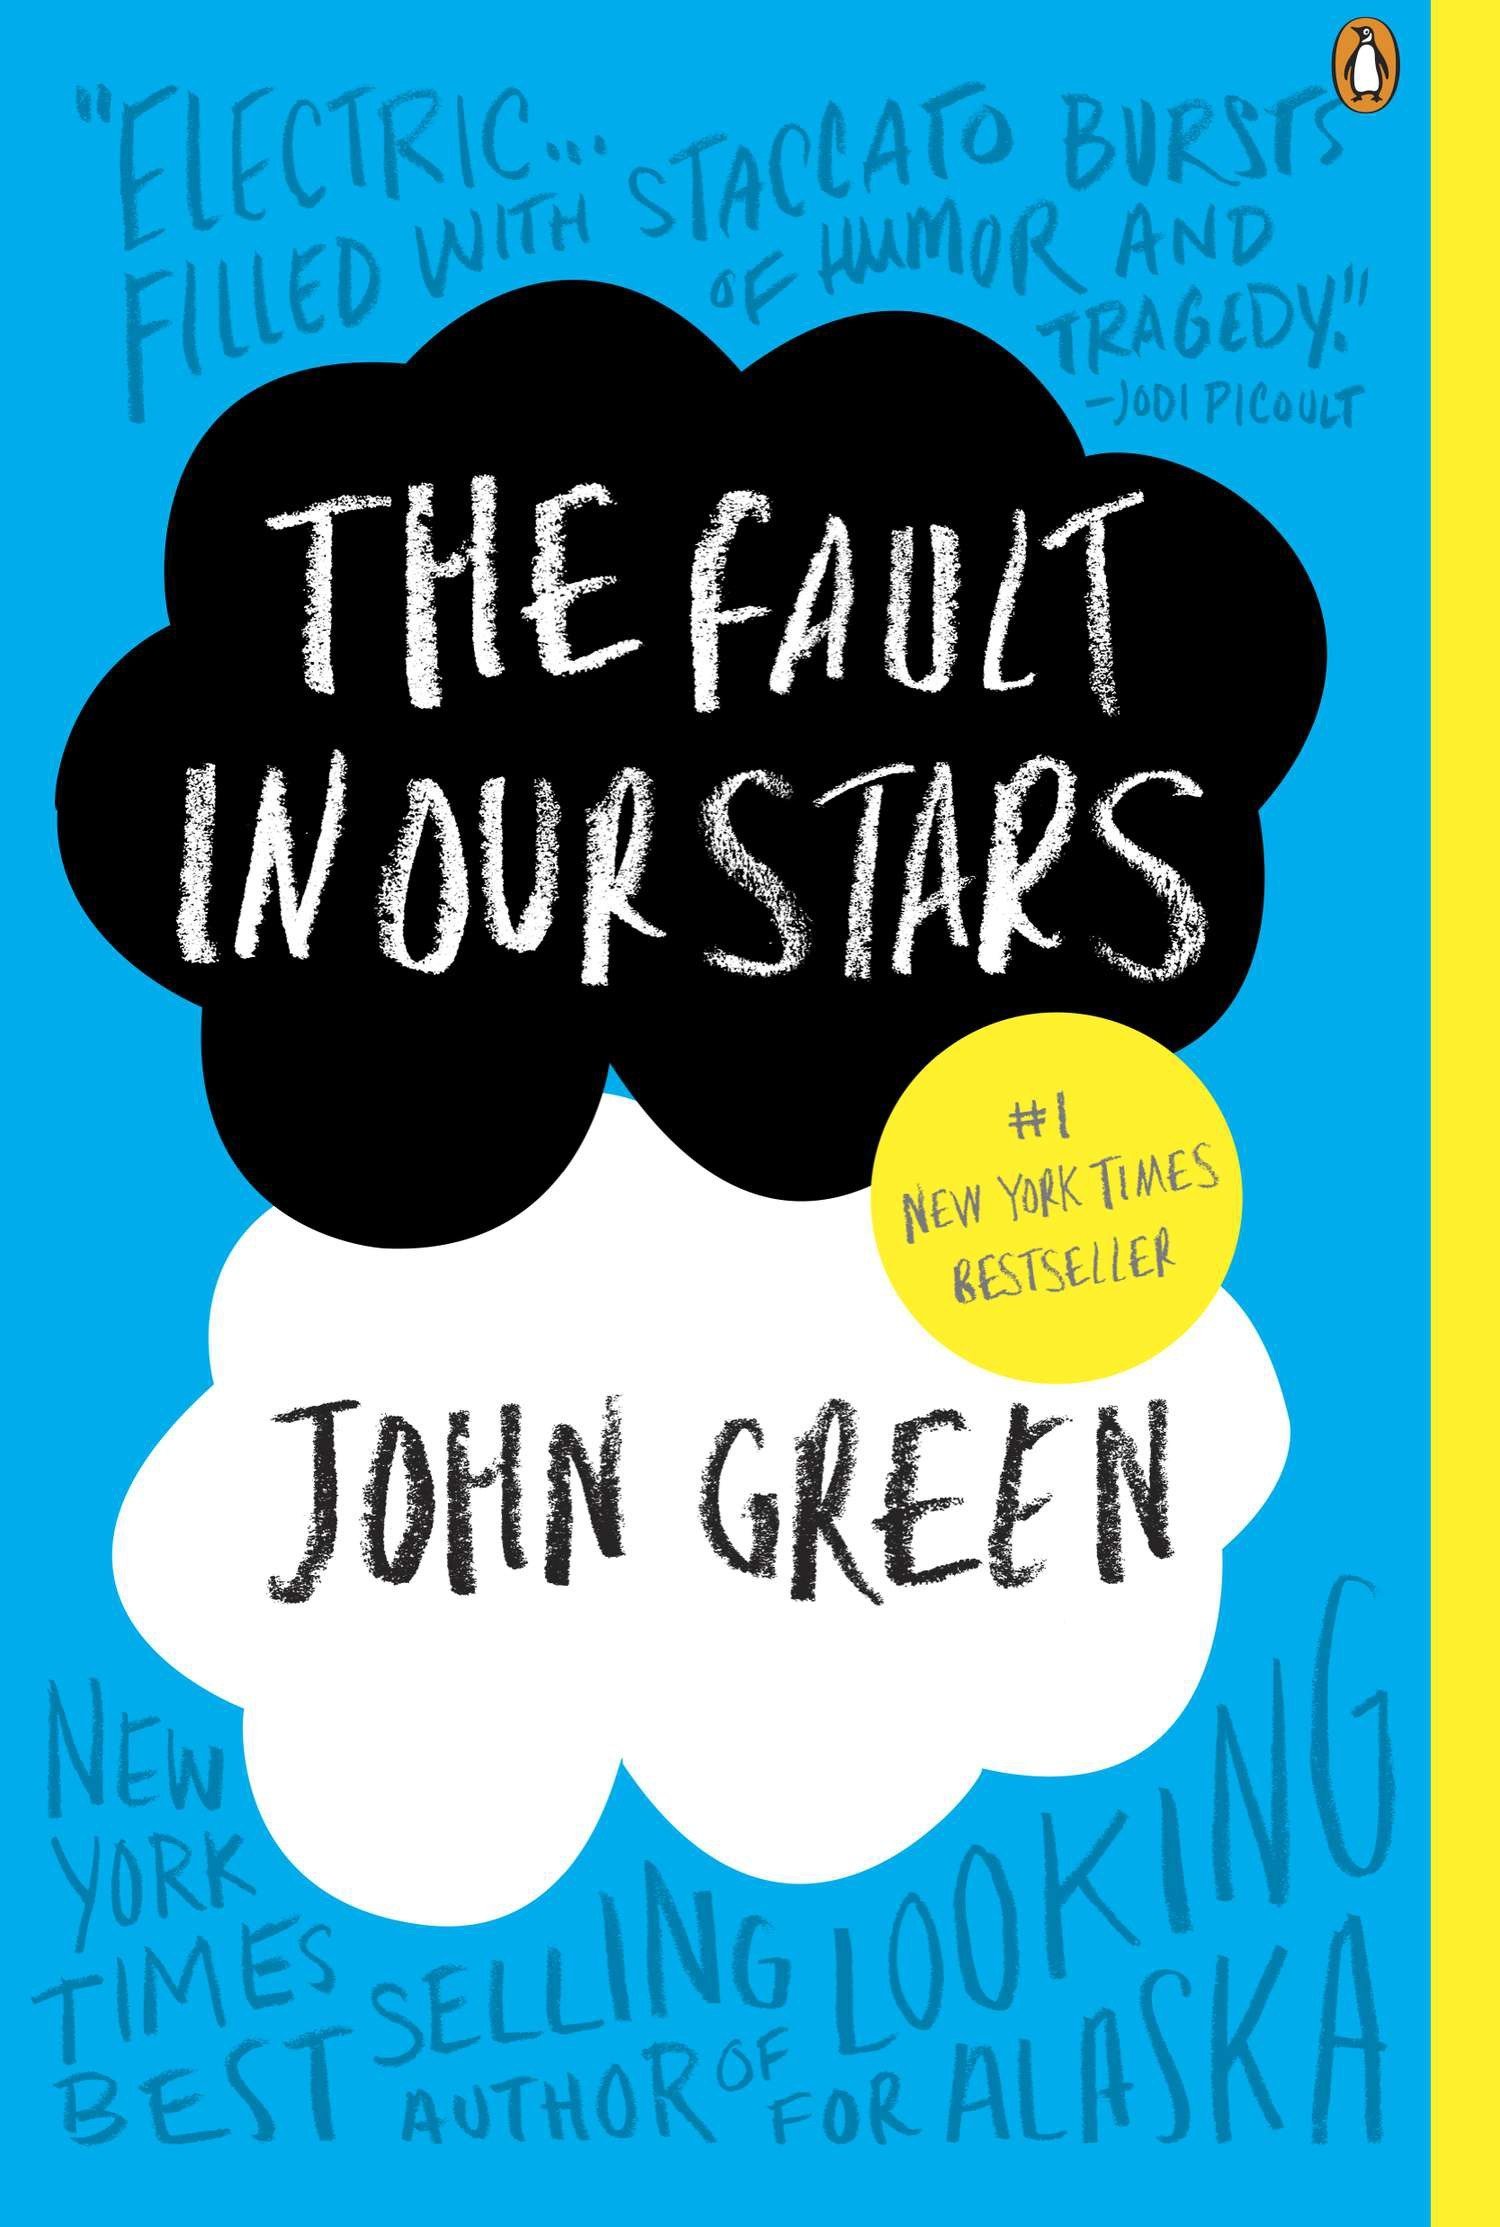 The Fault in Our Stars - Book Analysis